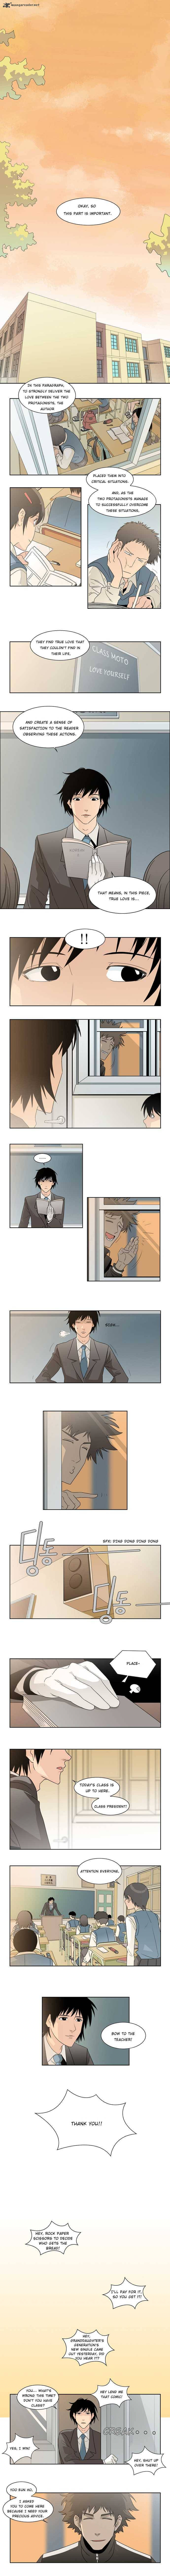 Melo Holic Chapter 1 Page 2